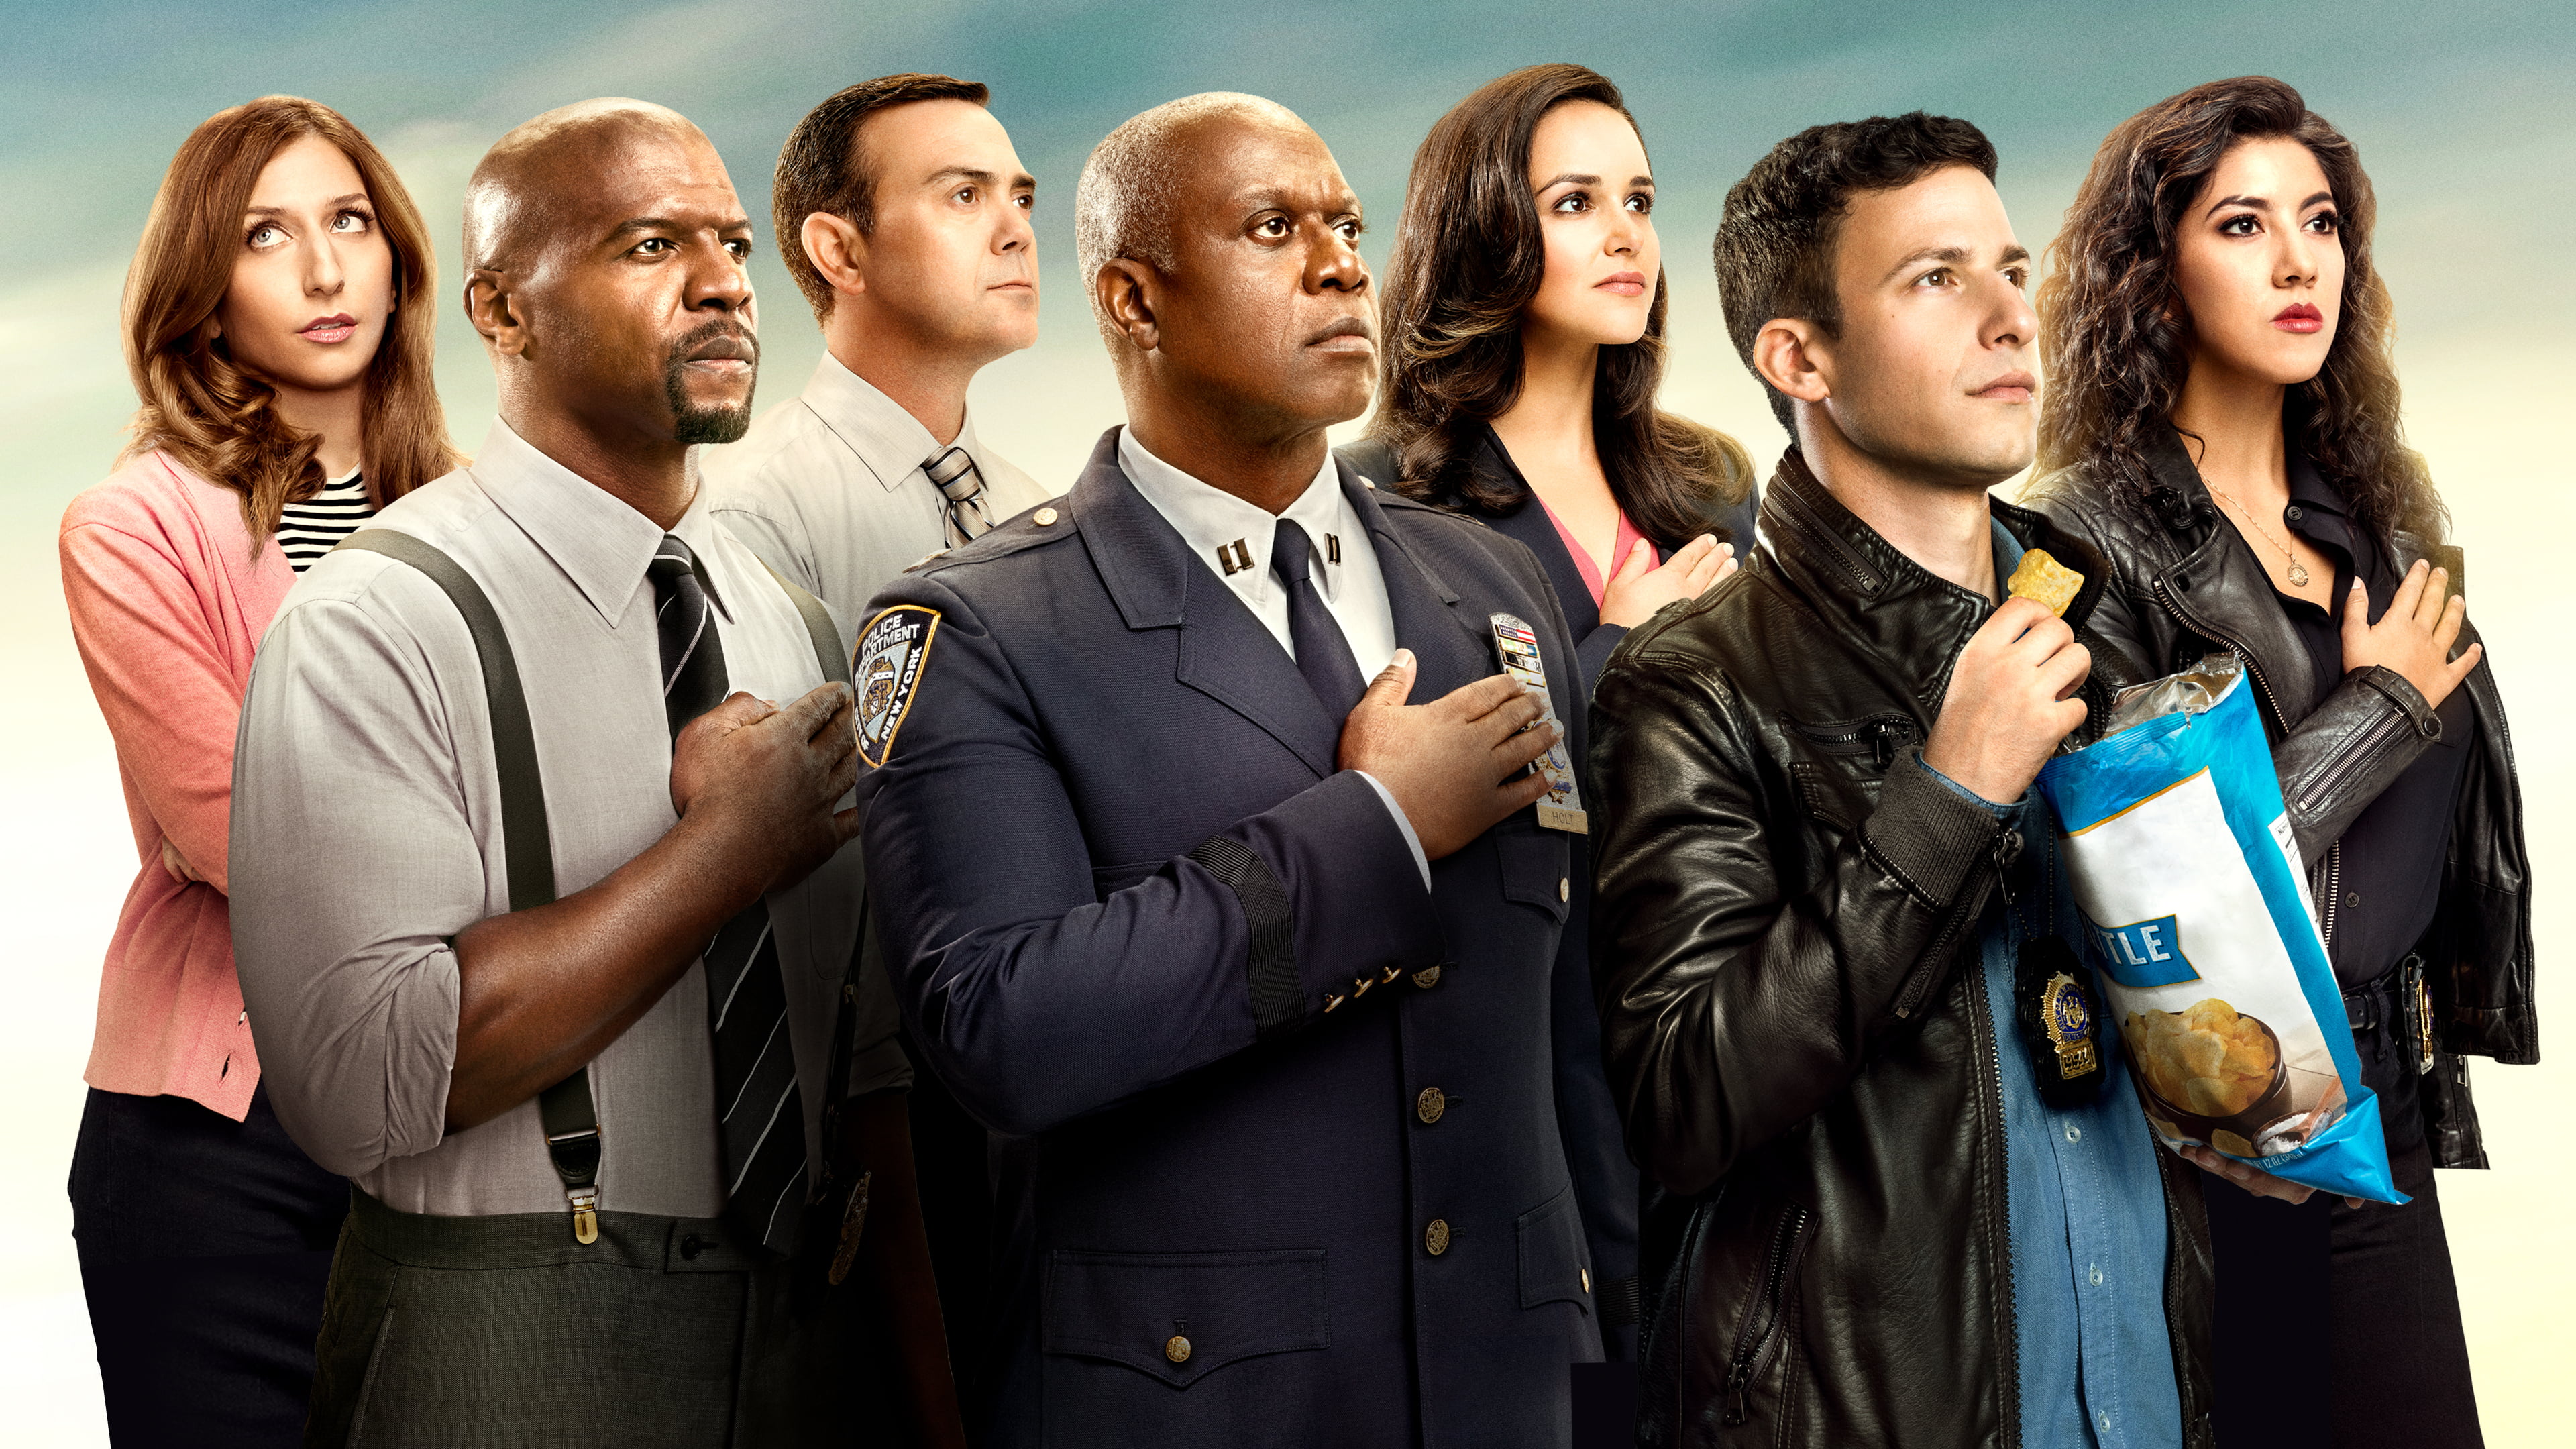 brooklyn nine nine, tv shows, hd, 4k, group of people, young adult